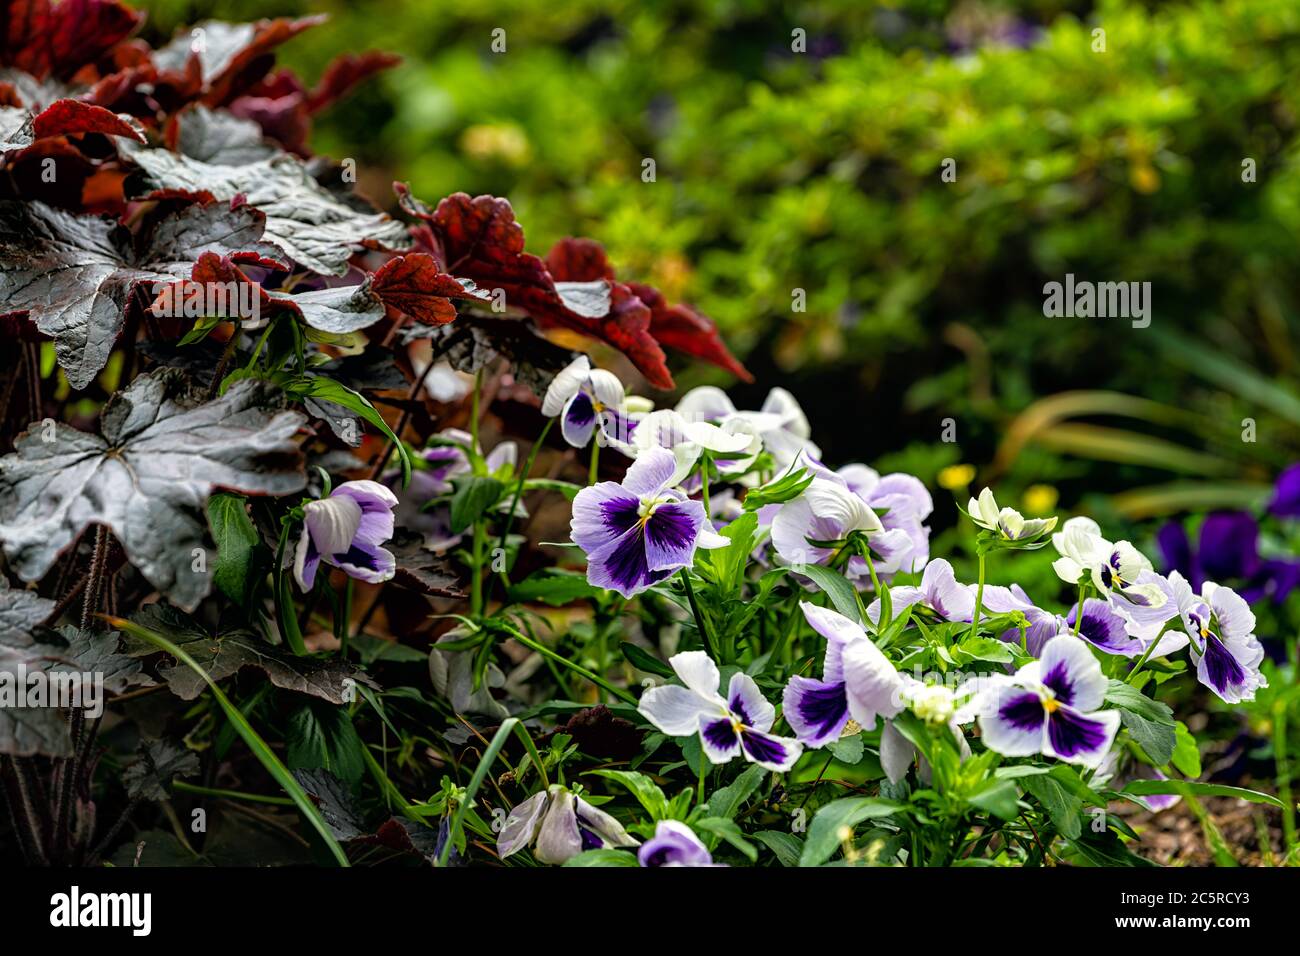 Closeup of white and purple blue pansy flowers in morning outdoor outside garden with green leaves Stock Photo